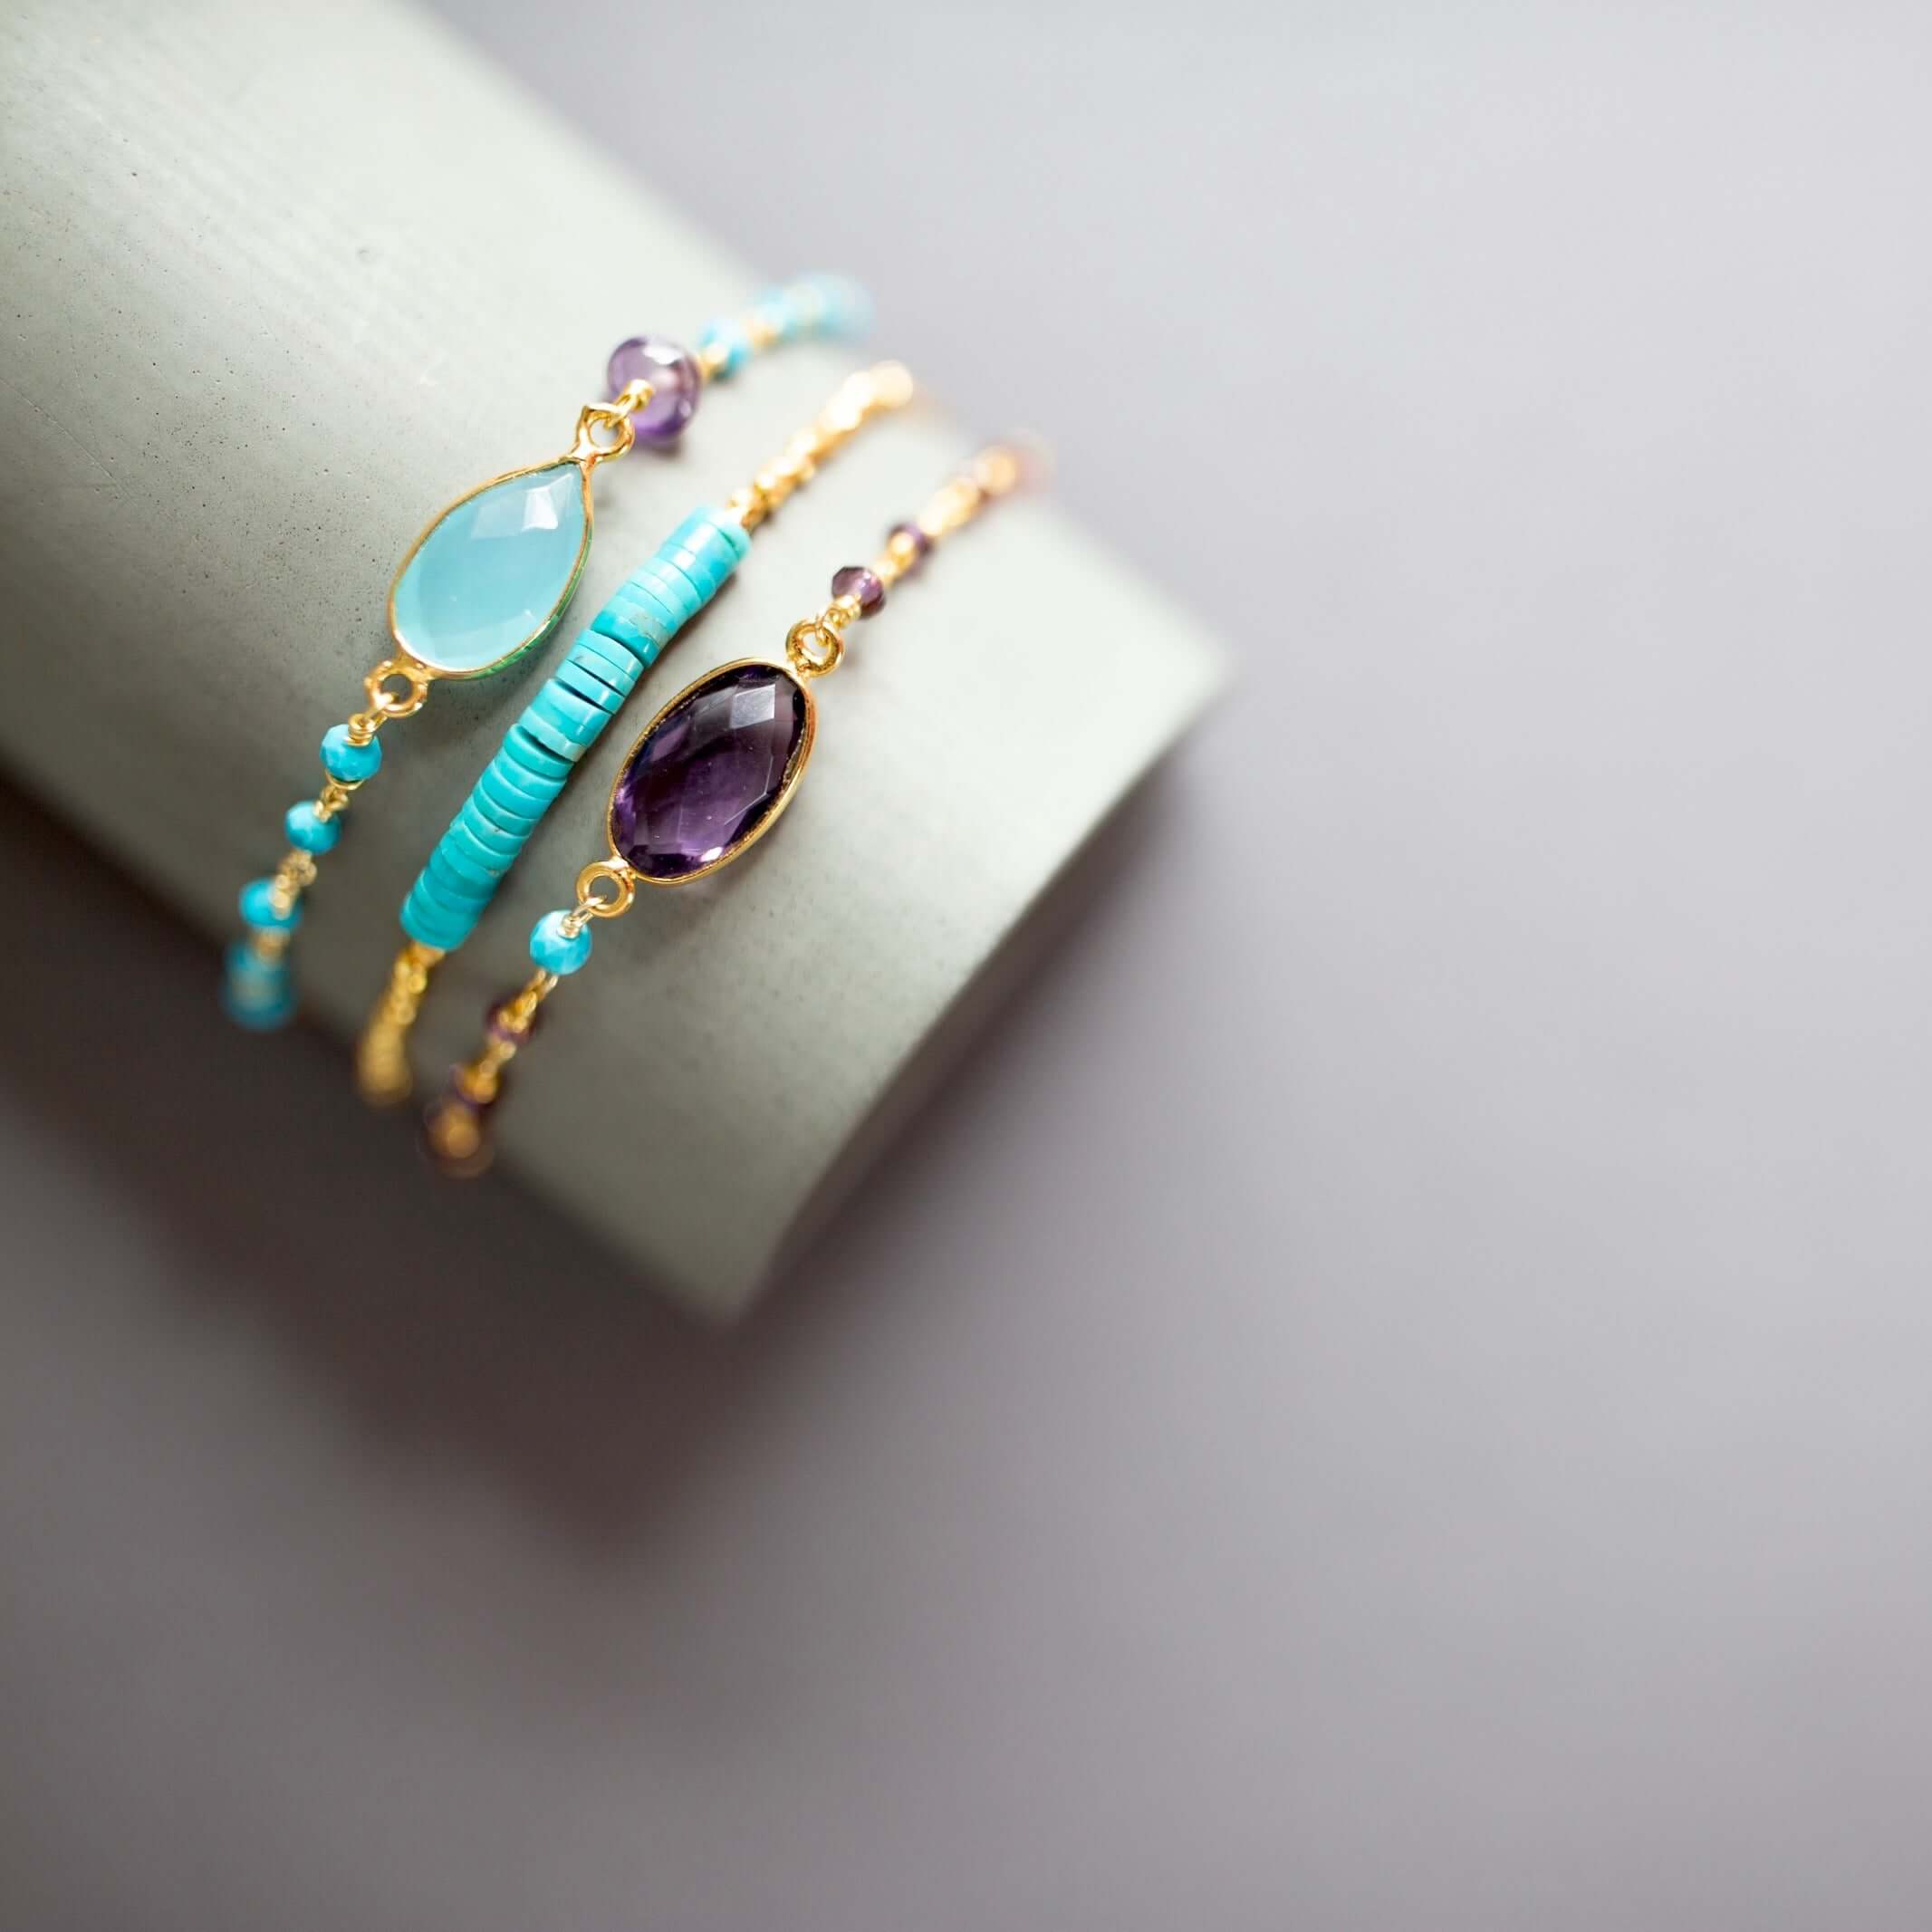 Gemstone arm candy duo: Aqua Blue Chalcedony and Amethyst bracelets. Adjustable, 14k gold plated, NYC-made.